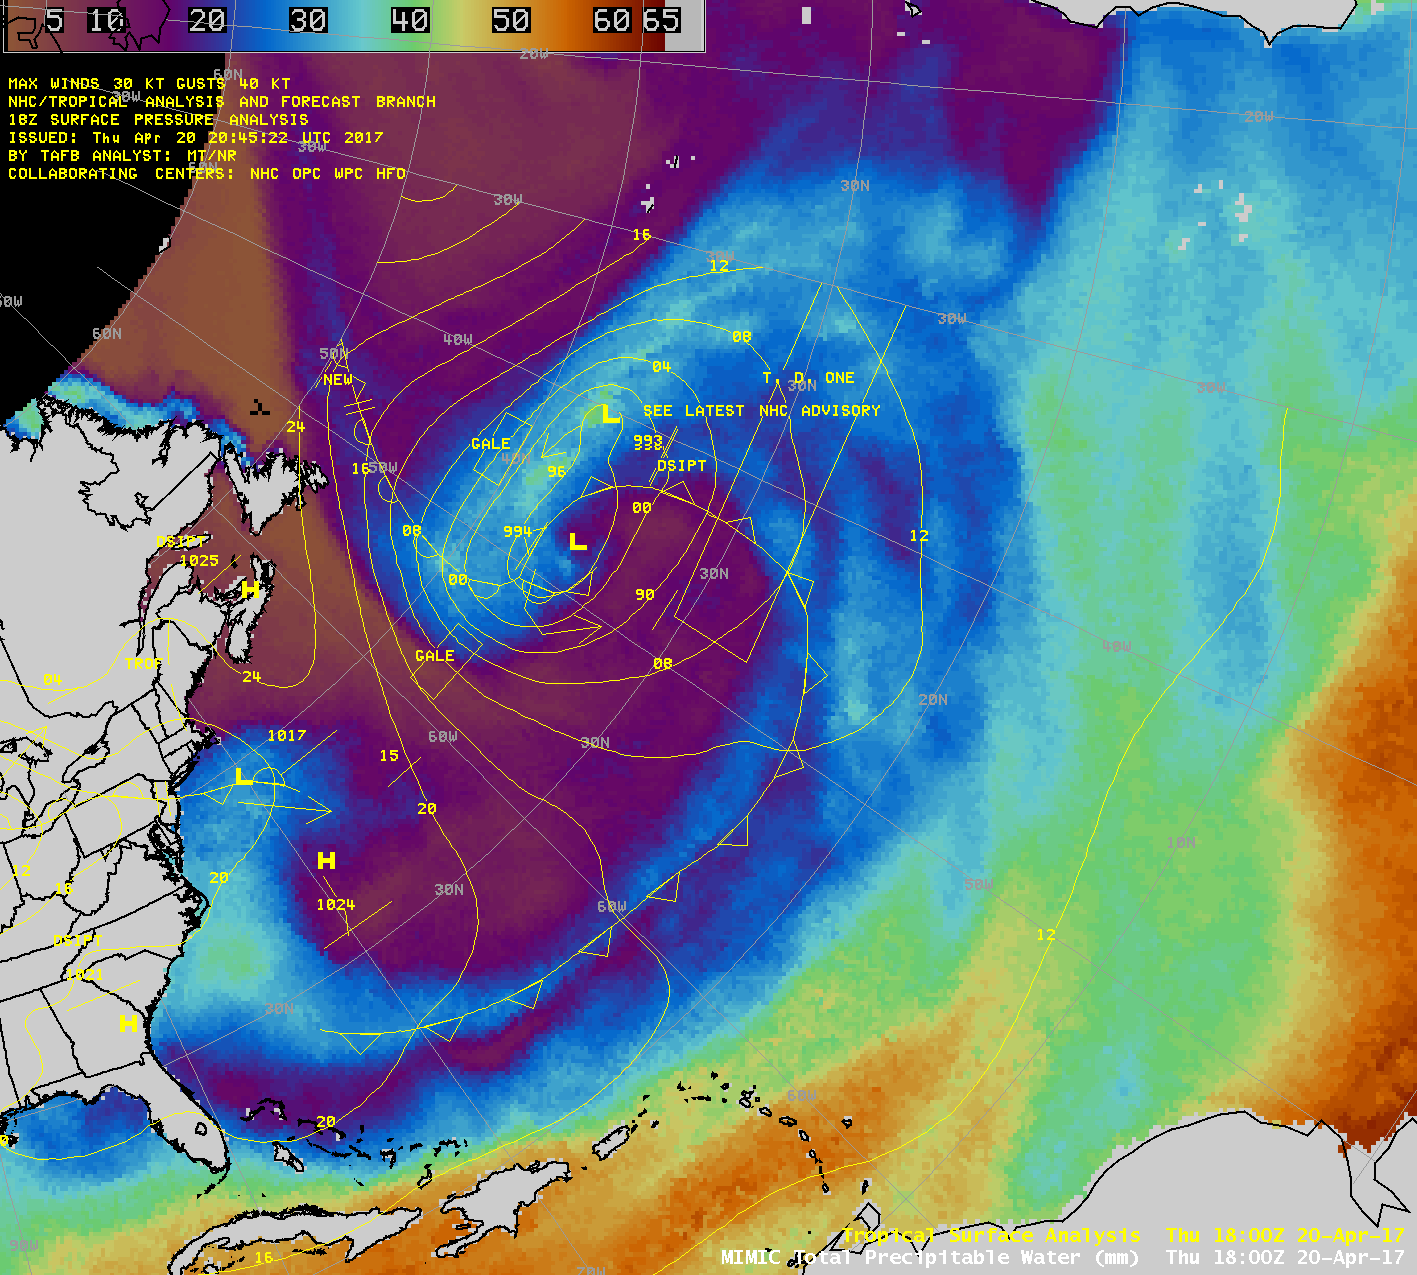 MIMIC Total Precipitable Water product, with surface analyses [click to play animation]